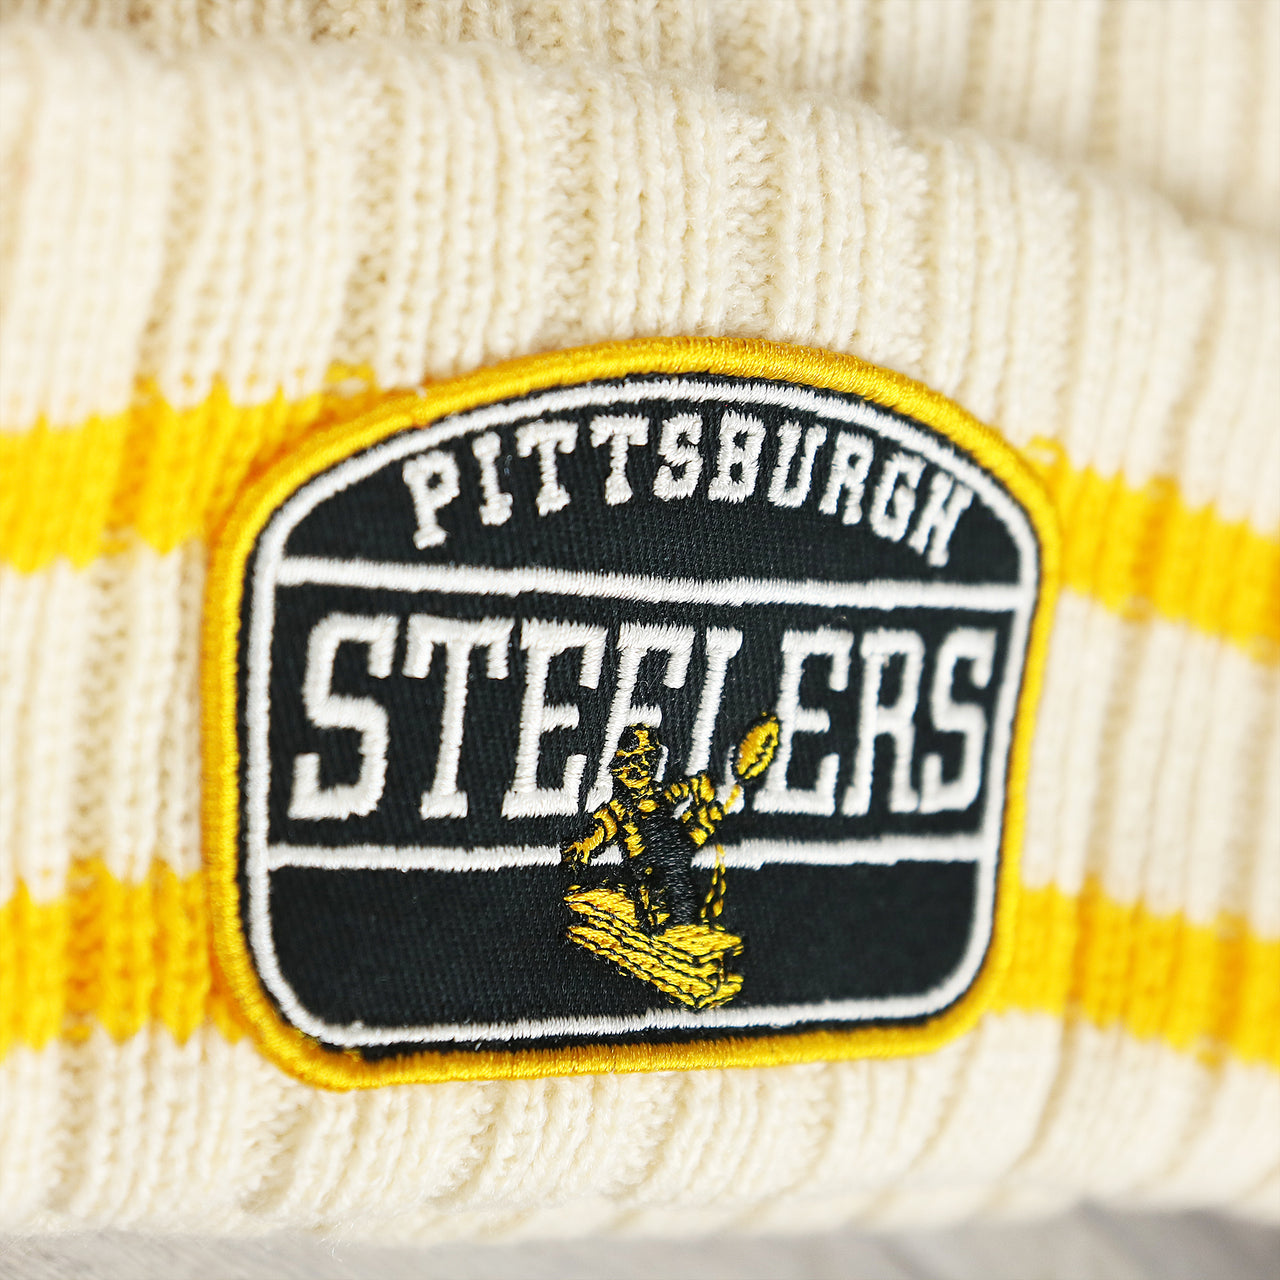 The Steelers Patch on the Throwback Pittsburgh Steelers Legacy 1962 Steelers Patch Pom Pom Beanie | Natural Beanie